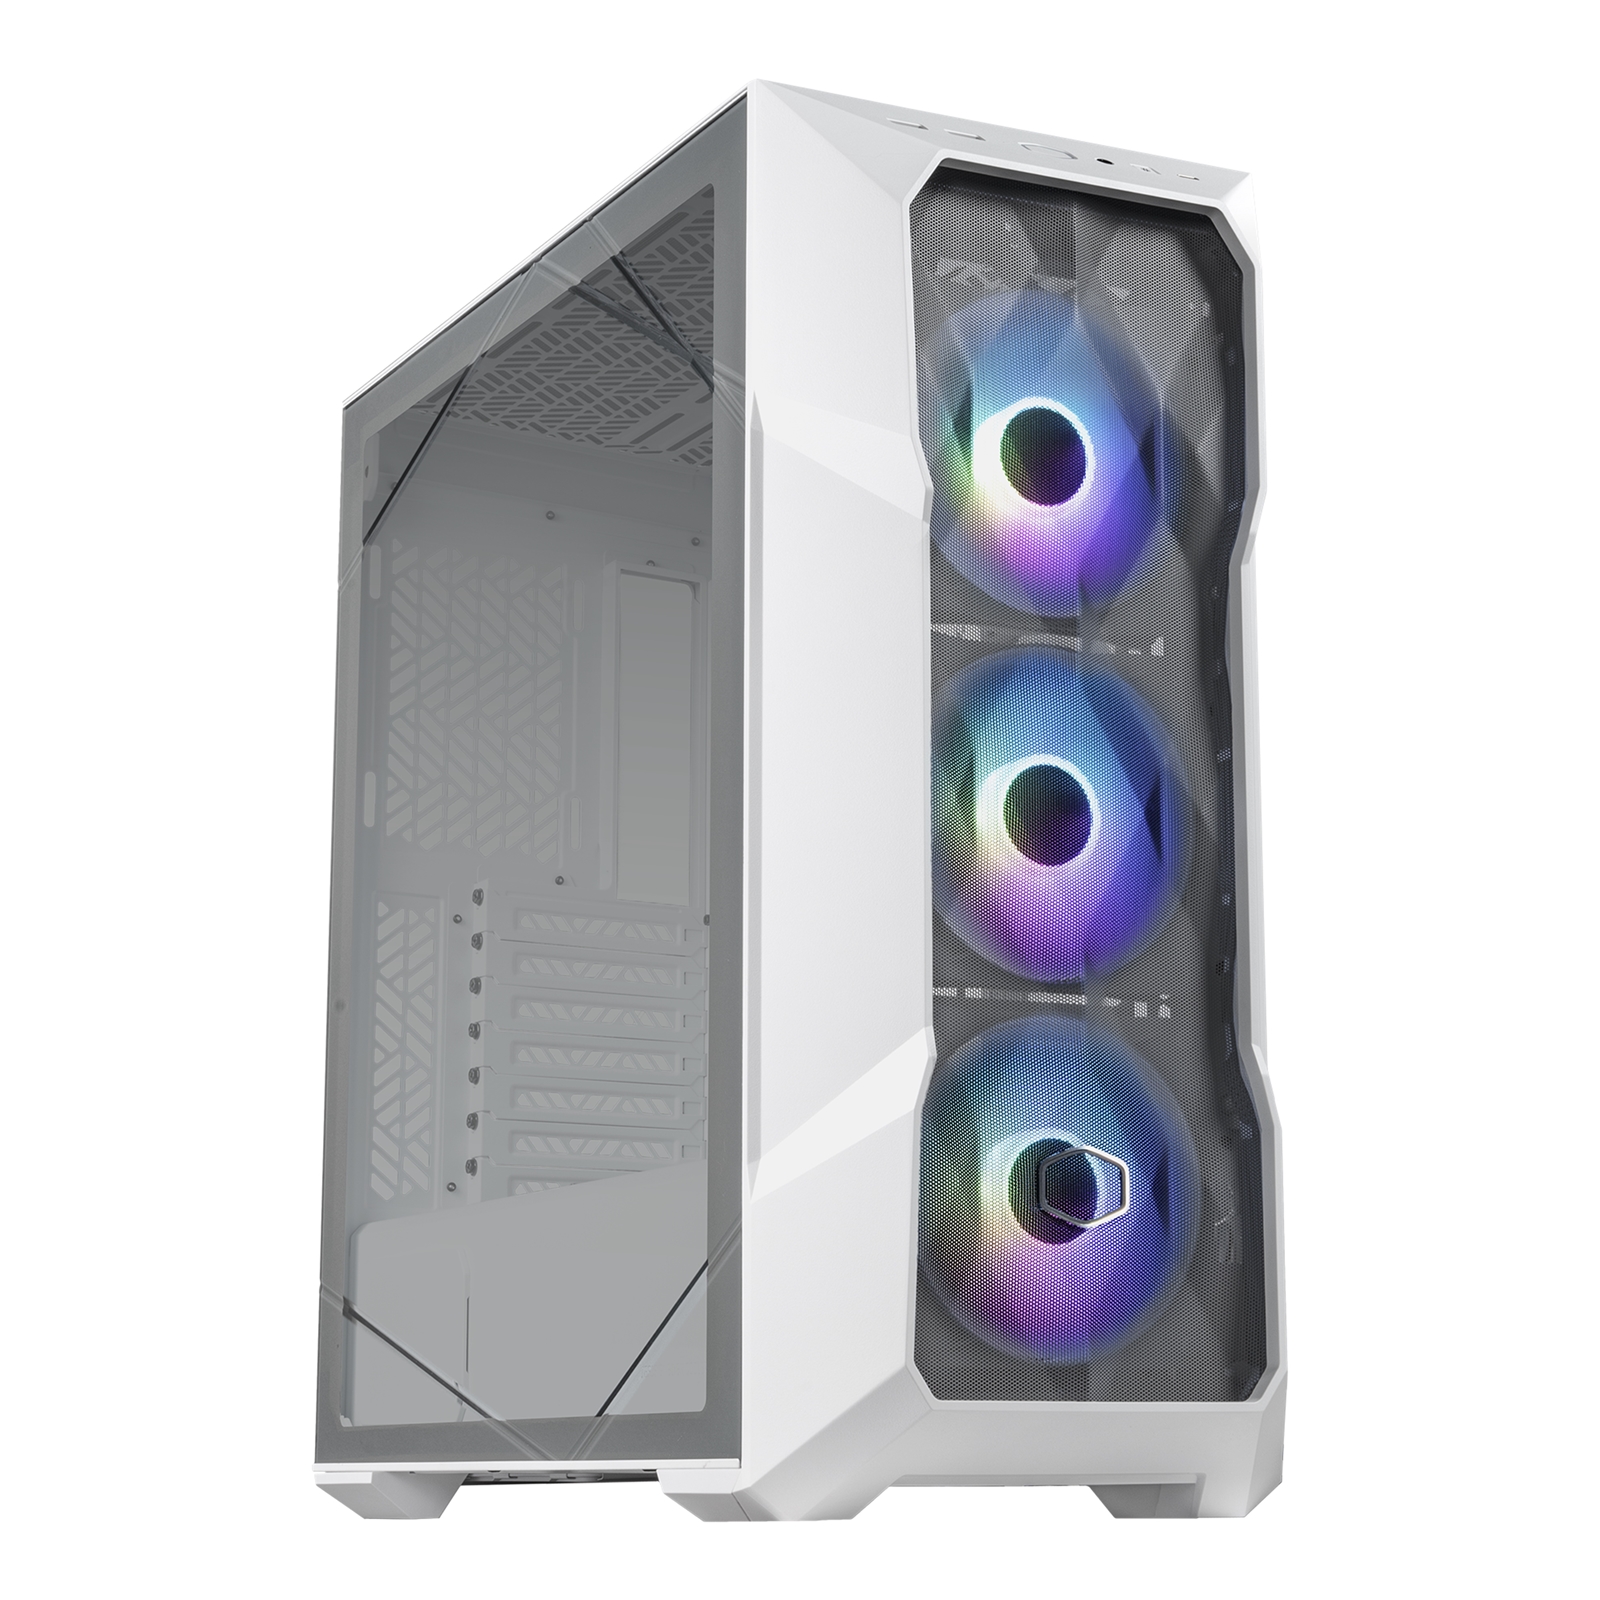 COOLER MASTER MasterBox TD500 Mesh V2 Case, White, Mid Tower, 2 x USB 3.2 Gen 1 Type-A / 1 x USB 3.2 Gen 2 Type-C, Tool-Free Crystalline Tempered Glass Side Panel with Polygonal FineMesh Front Panel, 3 x CF120 Addressable RGB Fans Included with ARGB & Fan